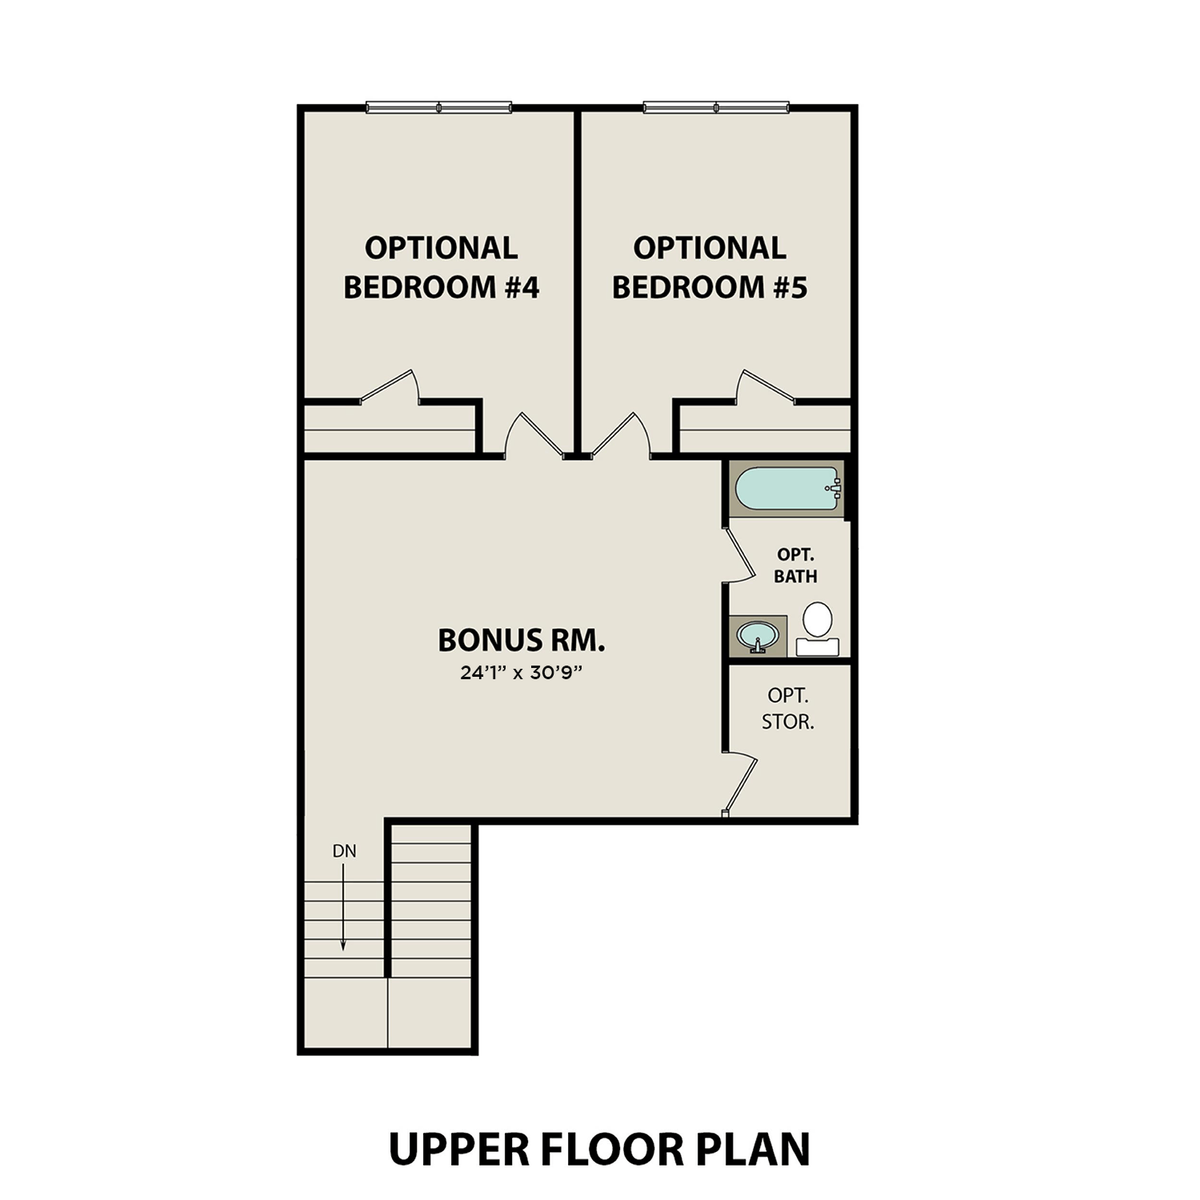 2 - The Finleigh with Bonus buildable floor plan layout in Davidson Homes' Creekside community.